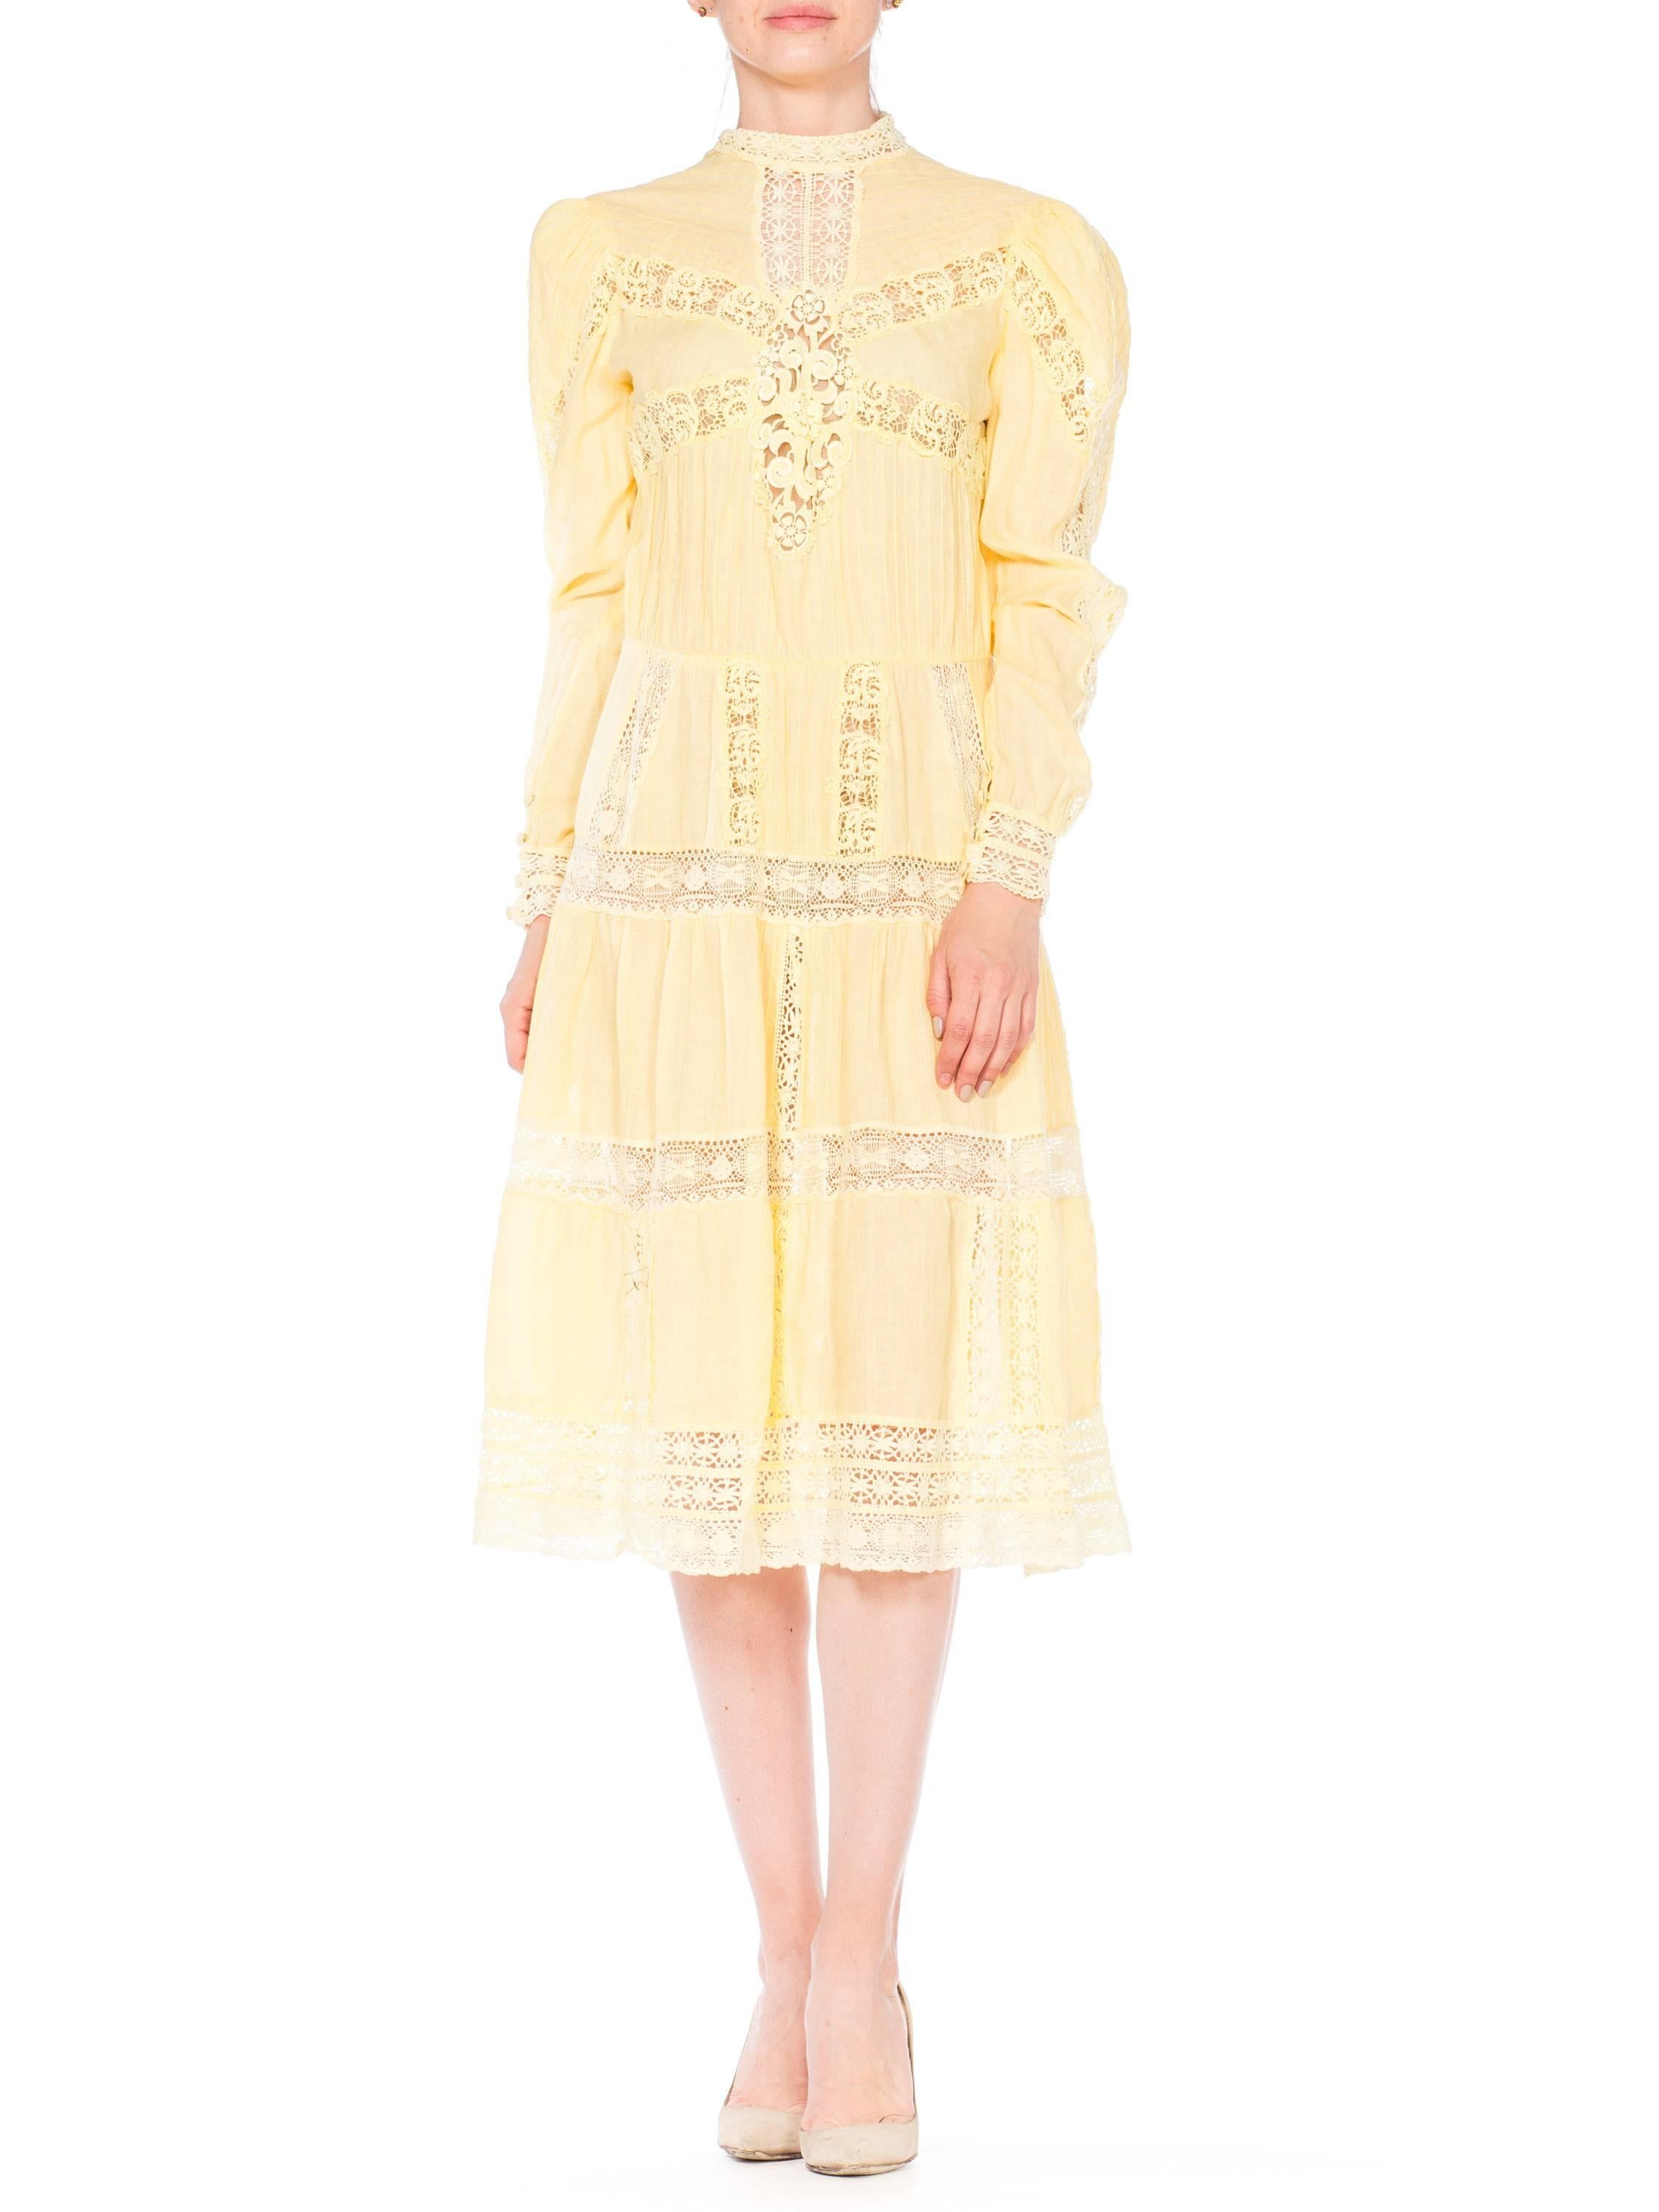 Yellow 1970s Victorian Style Linen Dress with Handmade Lace Details